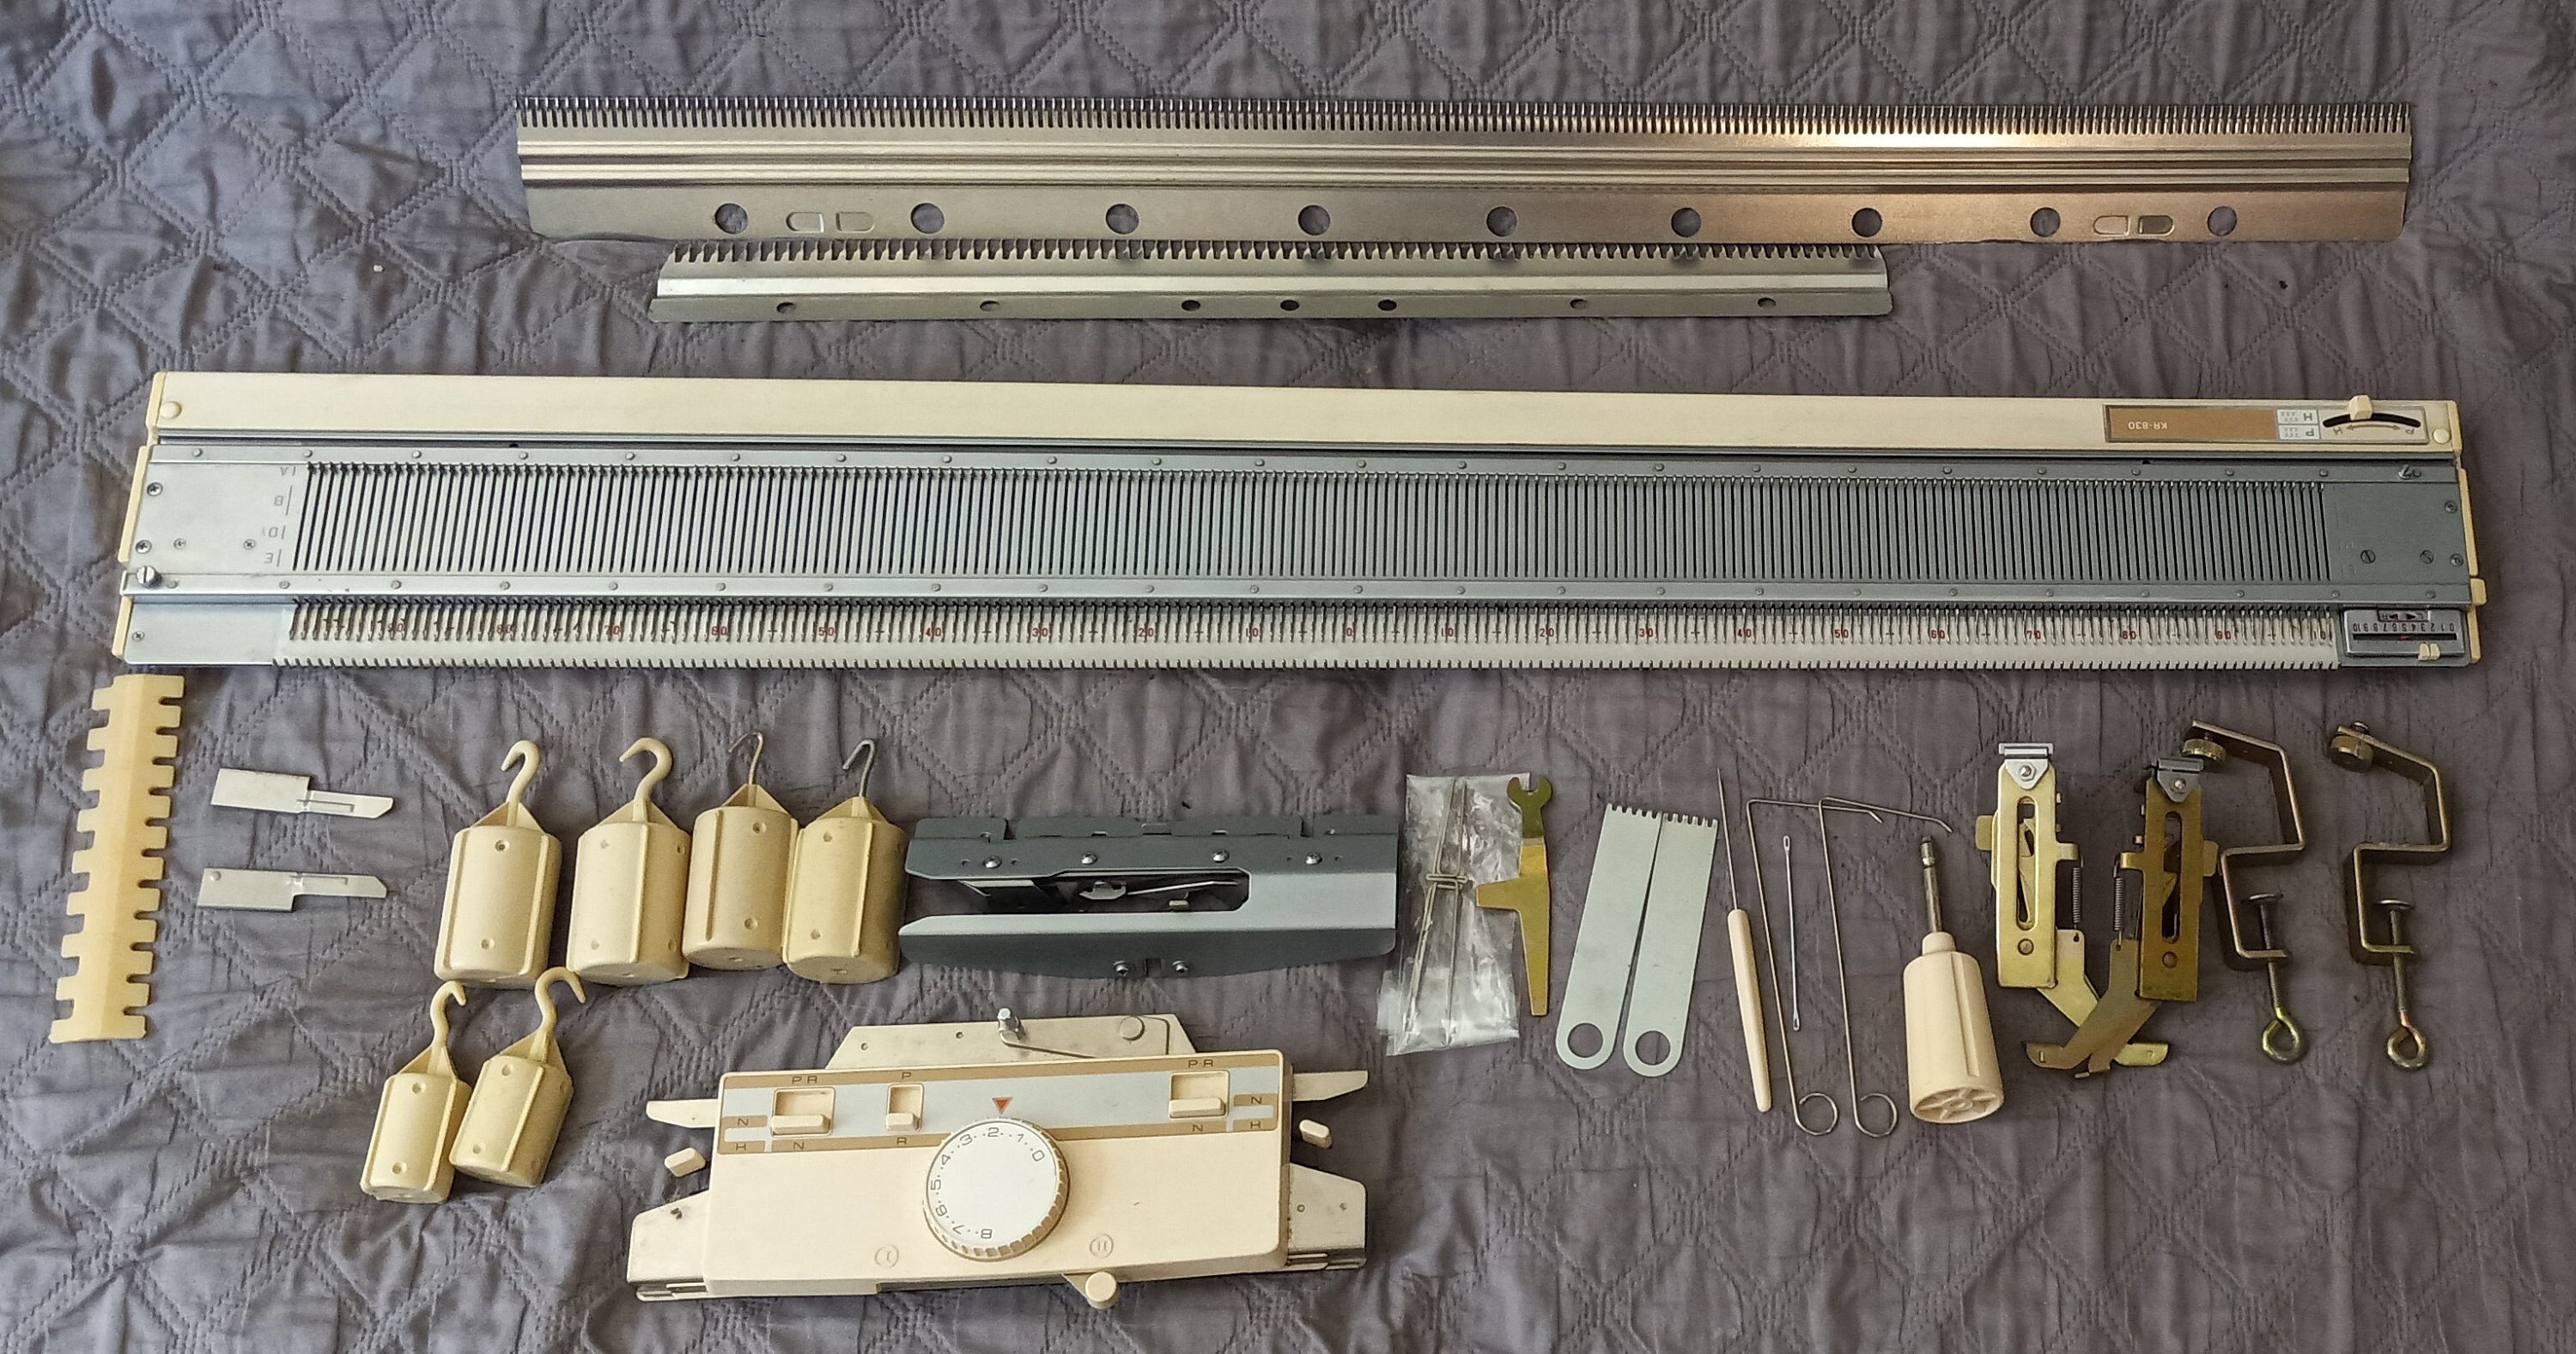 Accessories Box Assembly for Brother Knitting Machine KH820 KH830